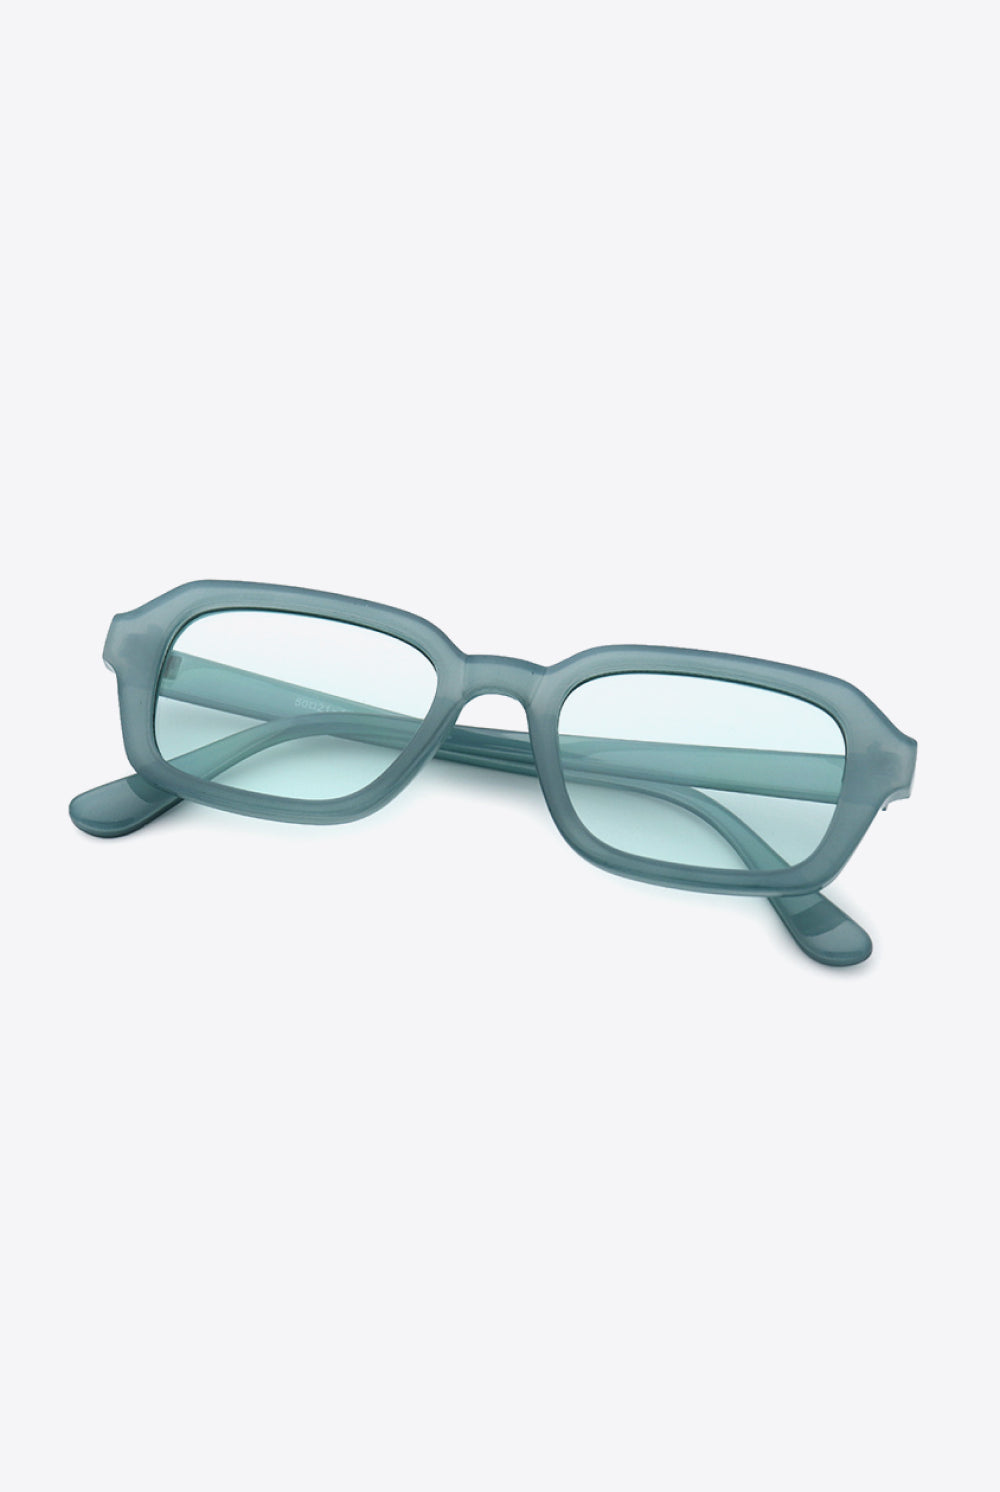 A pair of translucent grey, rectangle full-rim sunglasses, showcasing a modern and minimalist design with smooth lines and a subtle elegance, perfect for adding a contemporary touch to any ensemble.